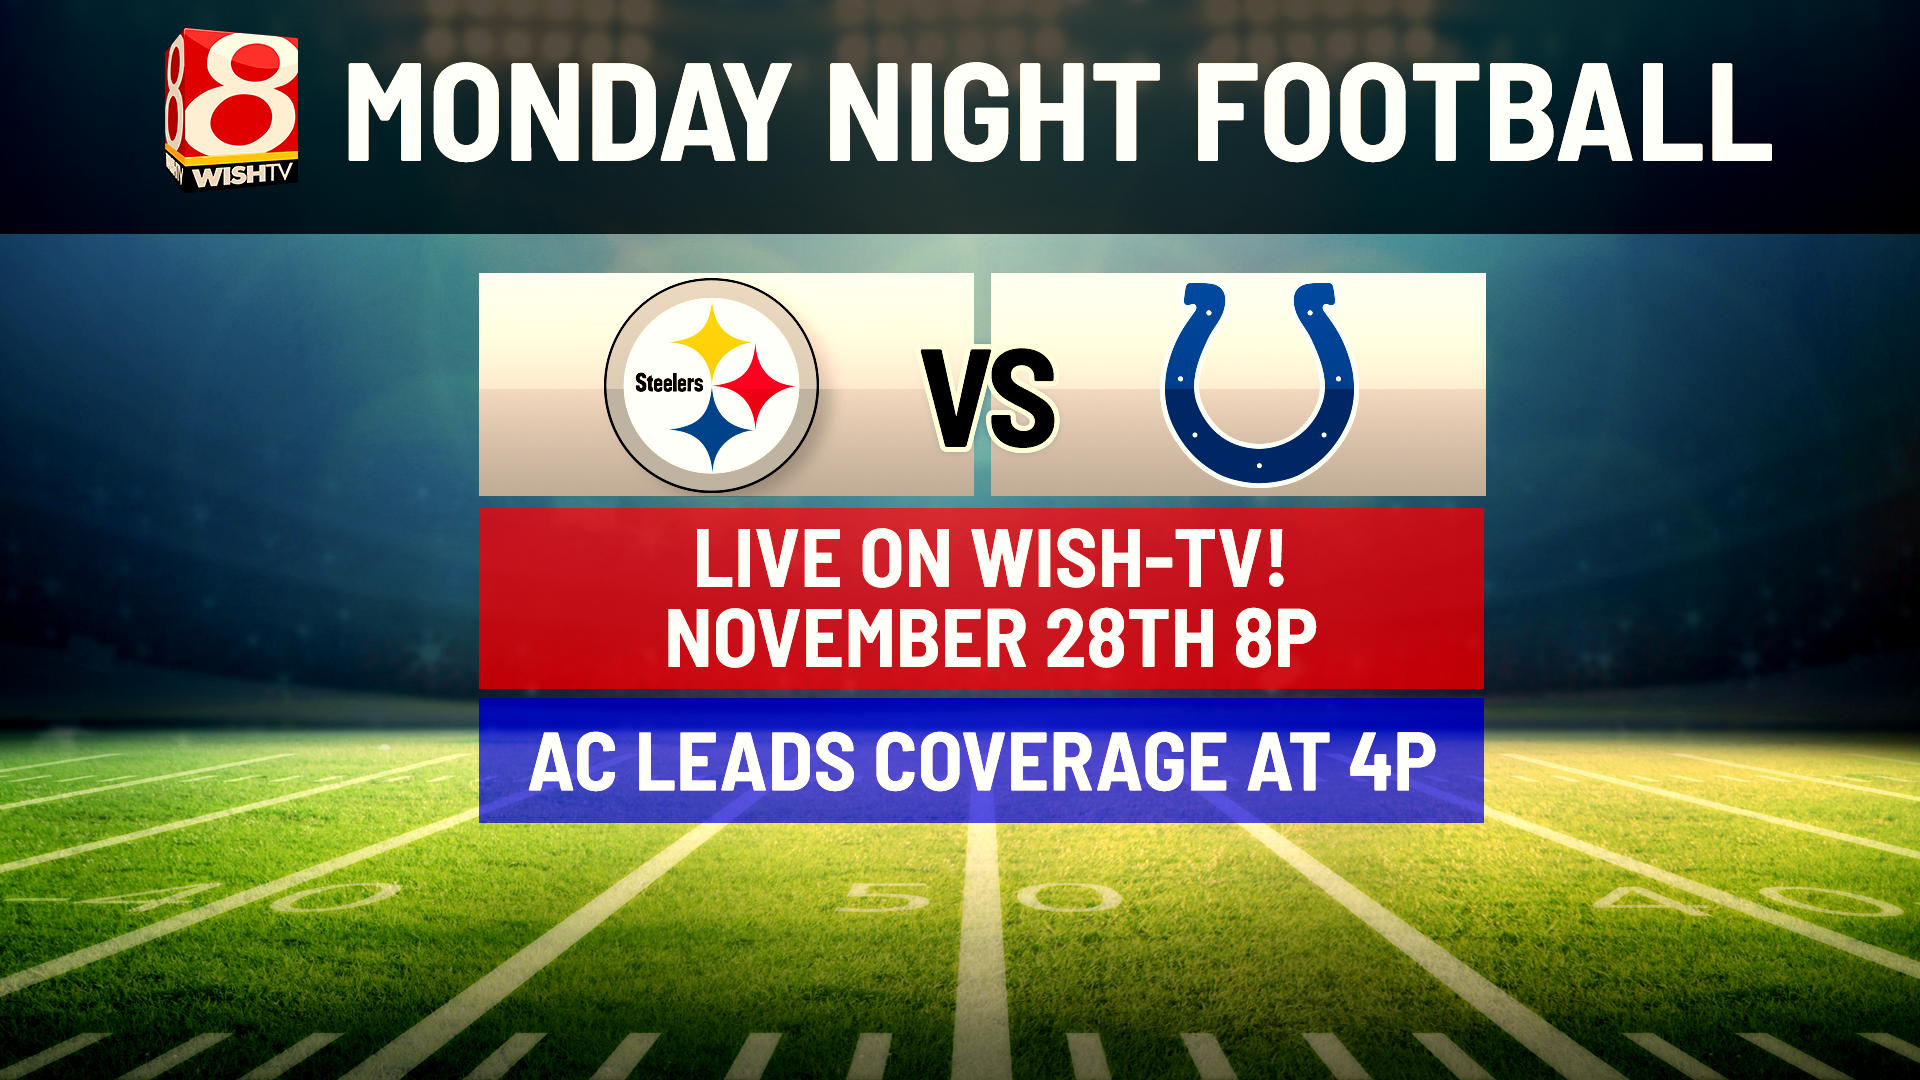 Steelers versus Colts Monday Night Football on WISH-TV live coverage plan -  WISH-TV, Indianapolis News, Indiana Weather